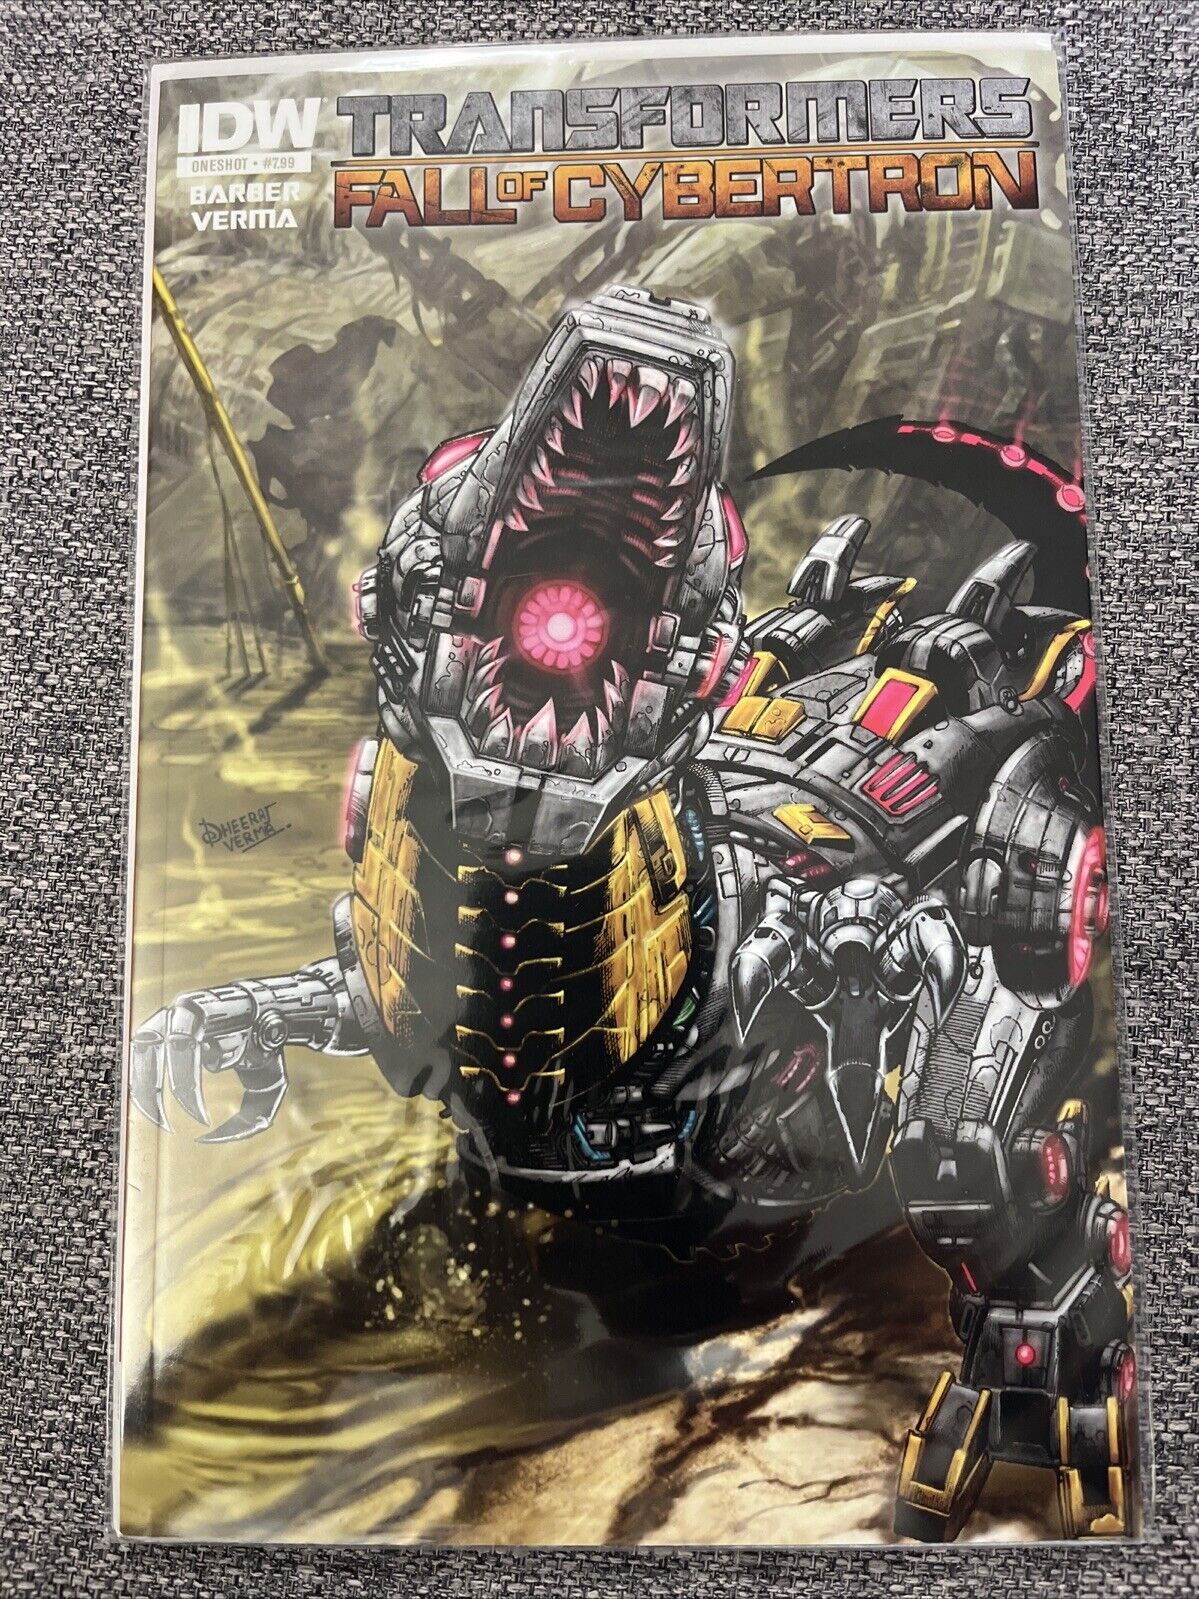 Transformers Fall of Cybertron One shot 2012 IDW Comic Rise of the Dino Bots NM